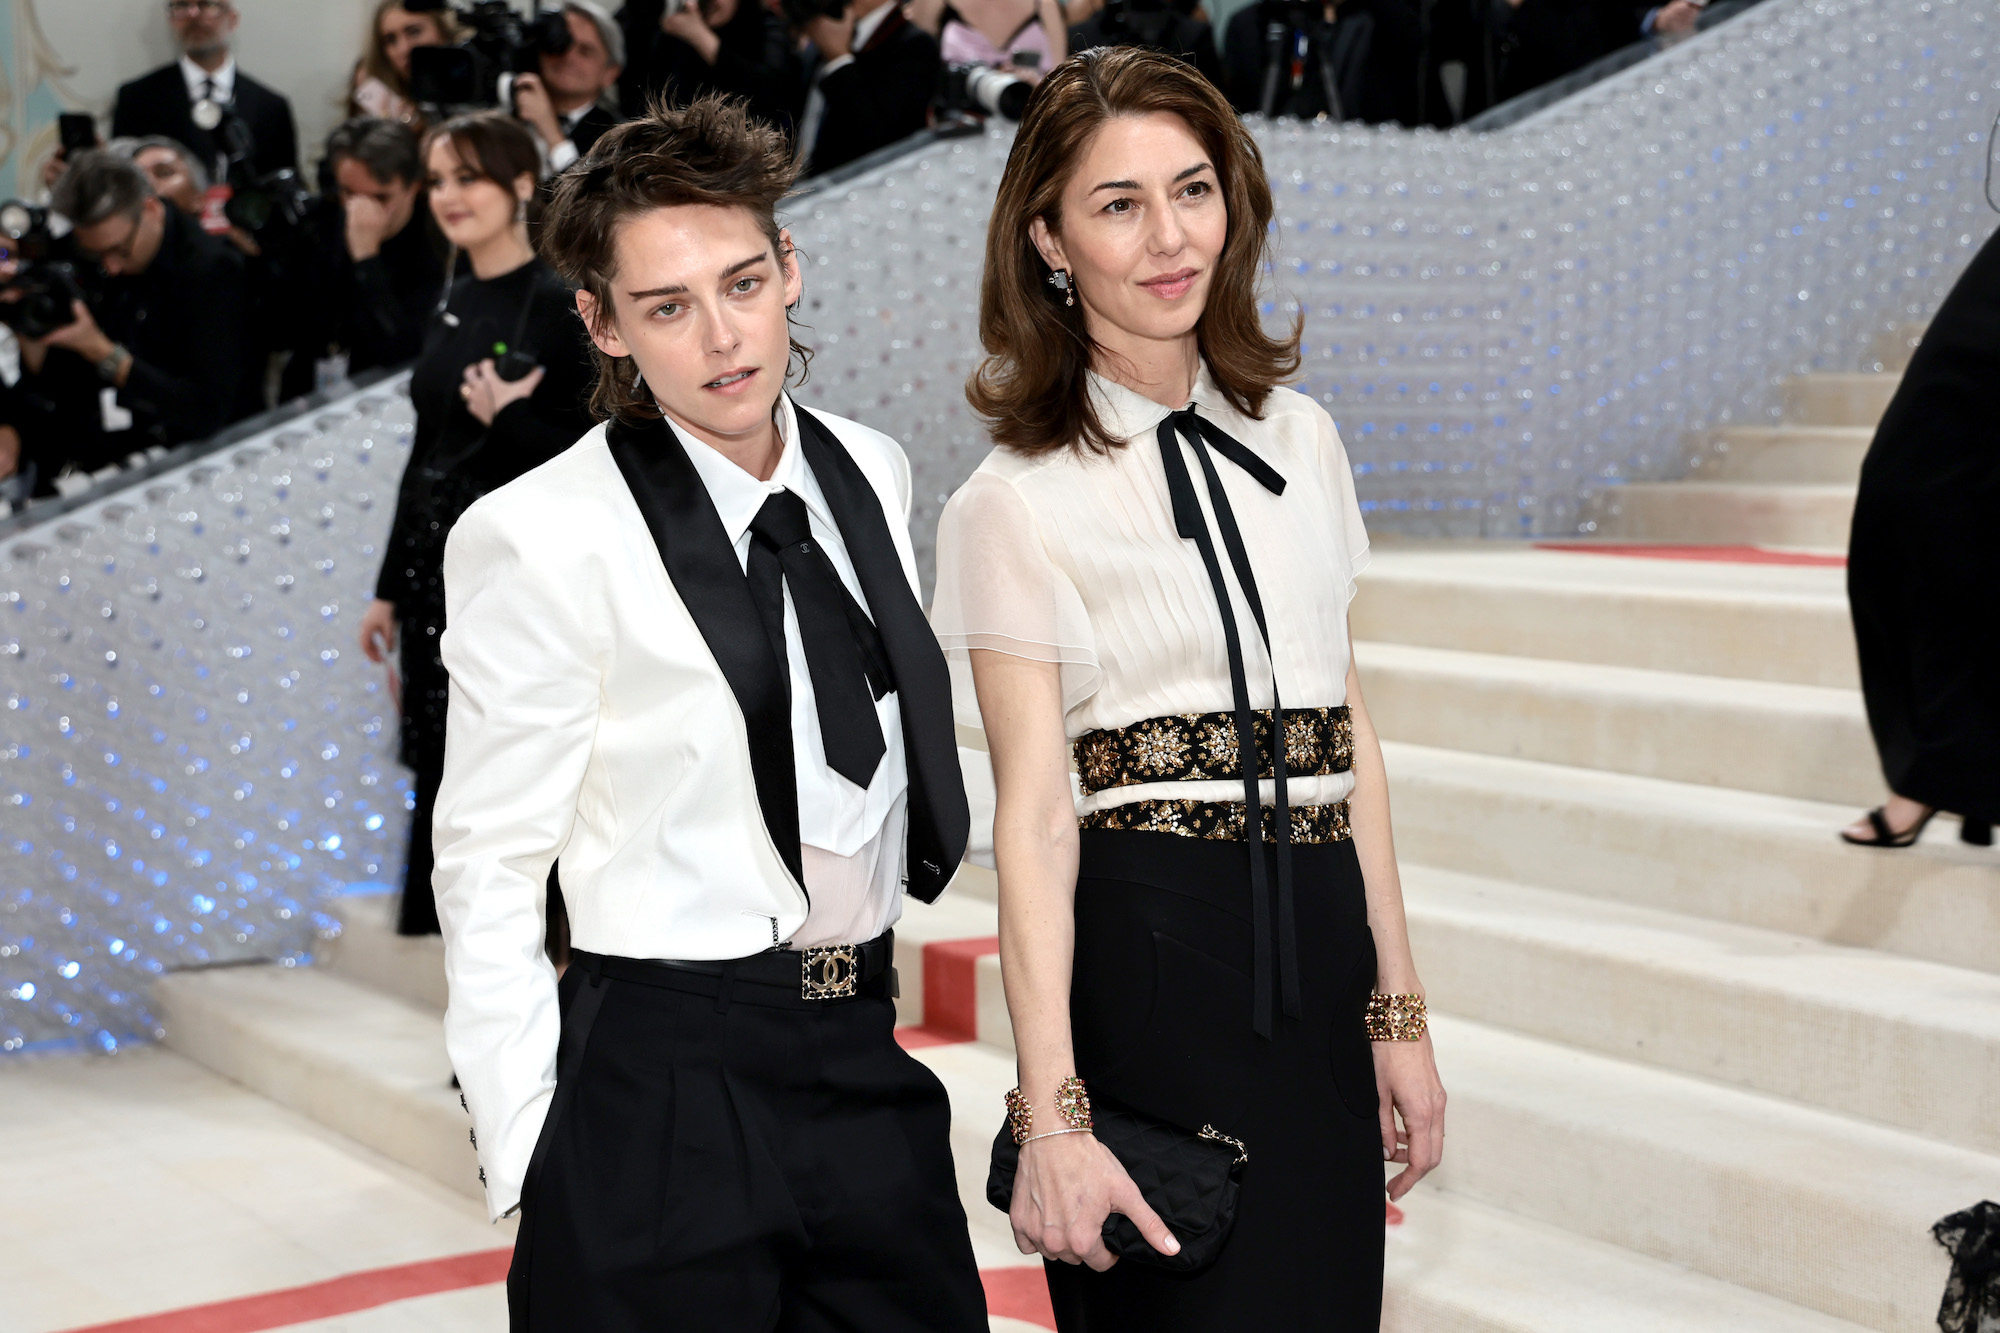 Kristen STEWART, CHANEL Ambassador, wore a white cotton drill jacket with a white silk chiffon blouse and black cotton gabardine pants, look 5, from the Cruise 2016/17 collection. CHANEL tie, belt and shoes. CODE COCO watch. Steel and one black dial set with a princess-cut diamond - CHANEL Watches CHANEL Makeup Sofia COPPOLA, CHANEL Ambassador, wore a white organza pleated blouse with a long black silk crêpe skirt embellished with silk crêpe belt embroidered with golden sequins and imitation pearls, look 43, from the Haute Couture Spring-Summer 2001 collection. CHANEL bag and shoes. PERSANE cuffs in 18K yellow gold, pink tourmalines, tsavorites, rubellites and diamonds CHANEL High Jewelry. FLEUR DE LAQUE earrings in 18K white gold, yellow gold, mother-of-pearls and diamonds CHANEL High Jewelry. CHANEL Makeup